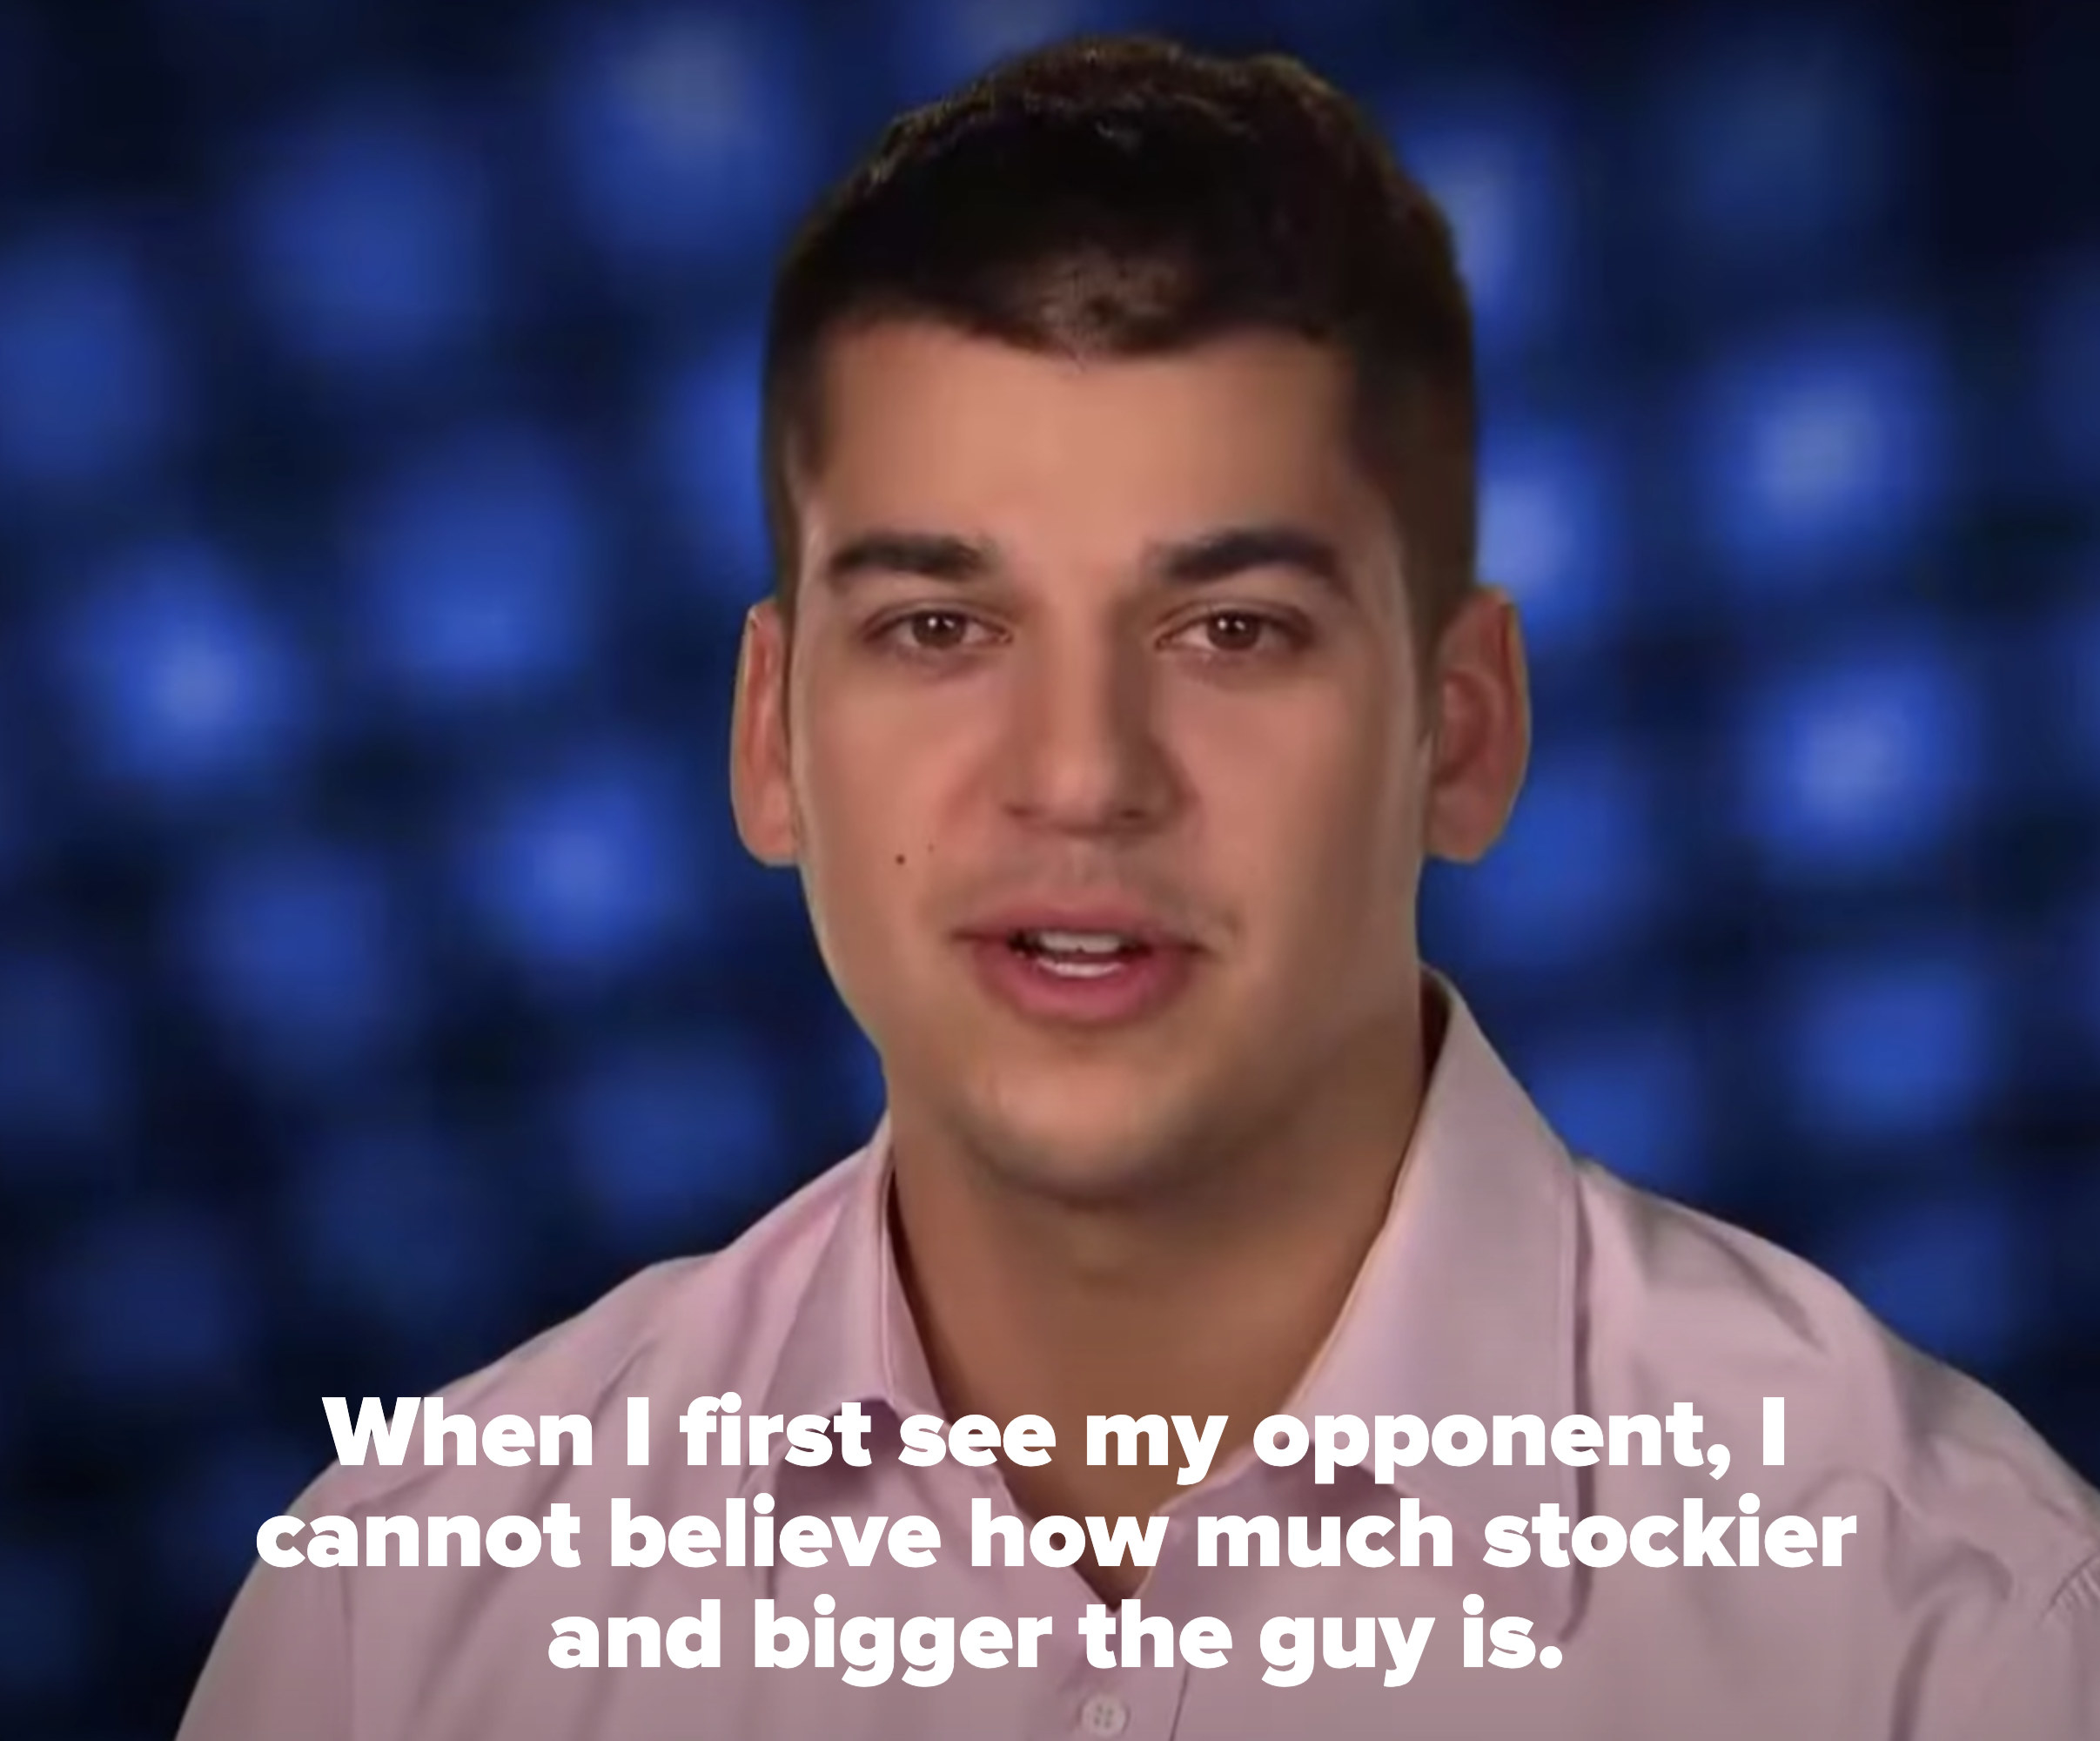 Rob saying &quot;When I first see my opponent, I cannot believe how much stockier and bigger the guy is&quot;